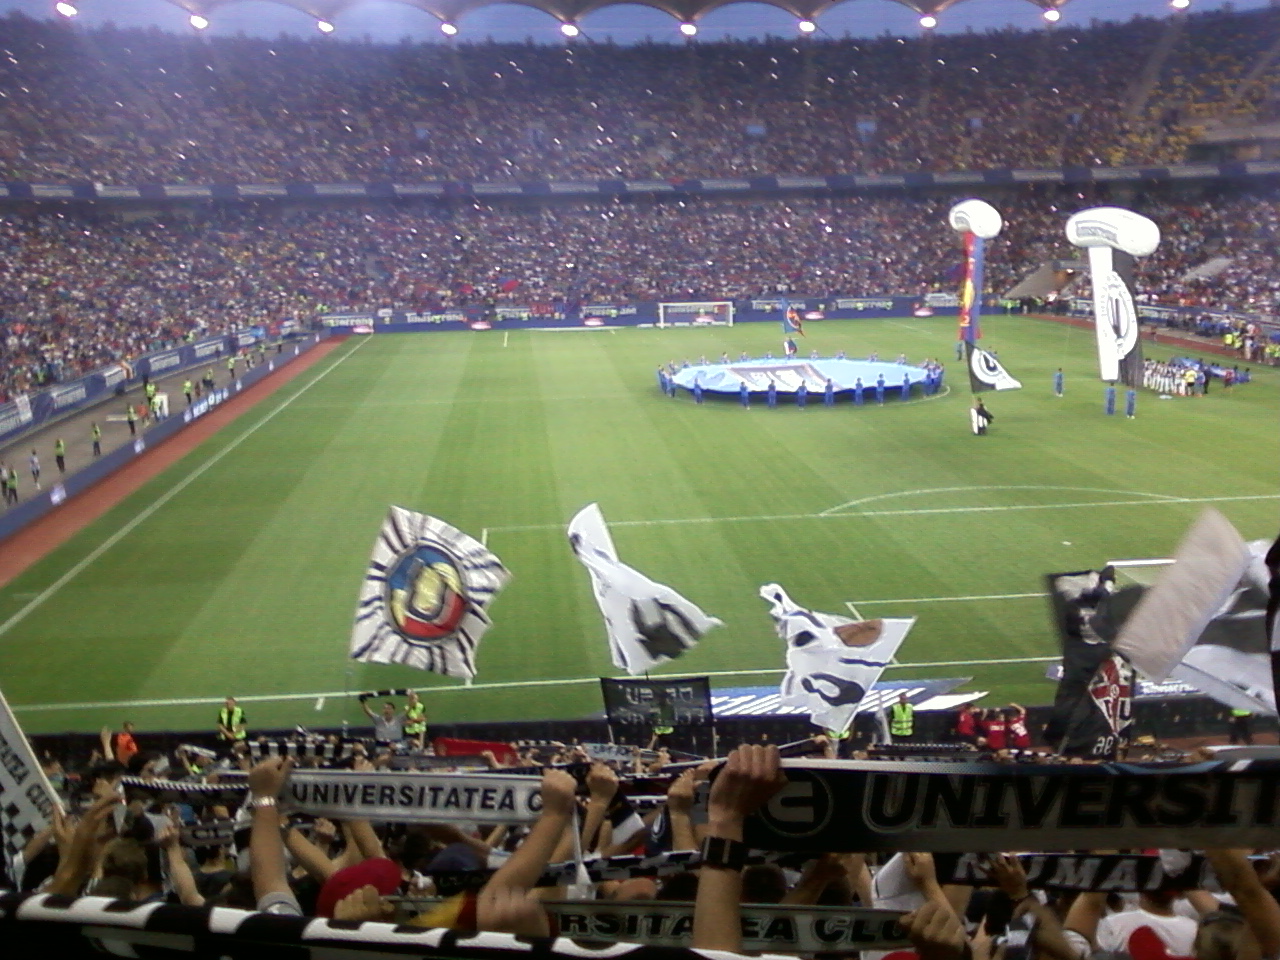 a stadium filled with fans, some holding up flags